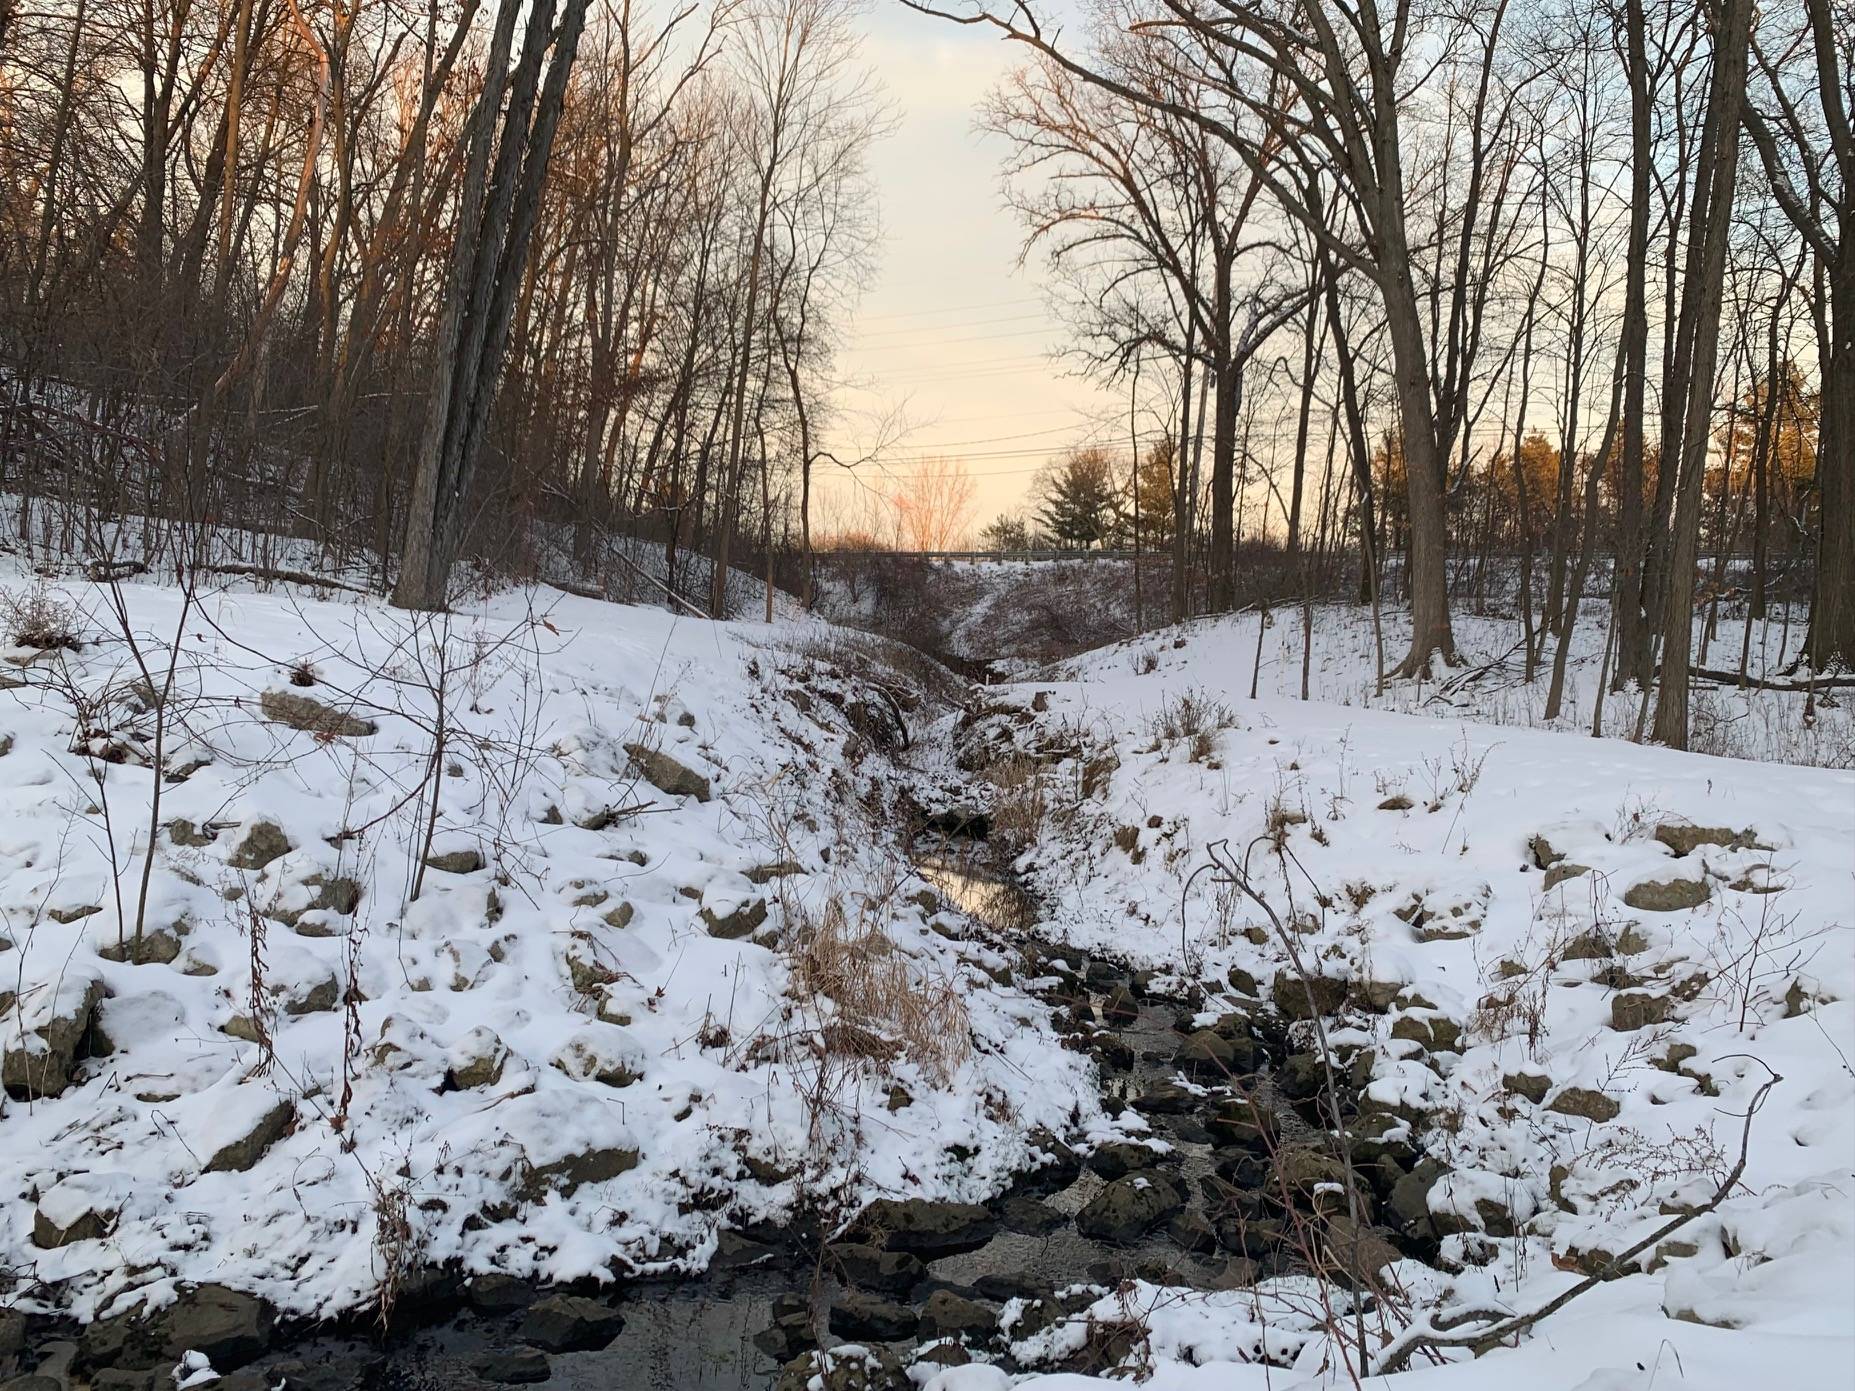 A drainage creek connects Church Lake to a nearby roadway, potentially delivering road salt applied during the winter.